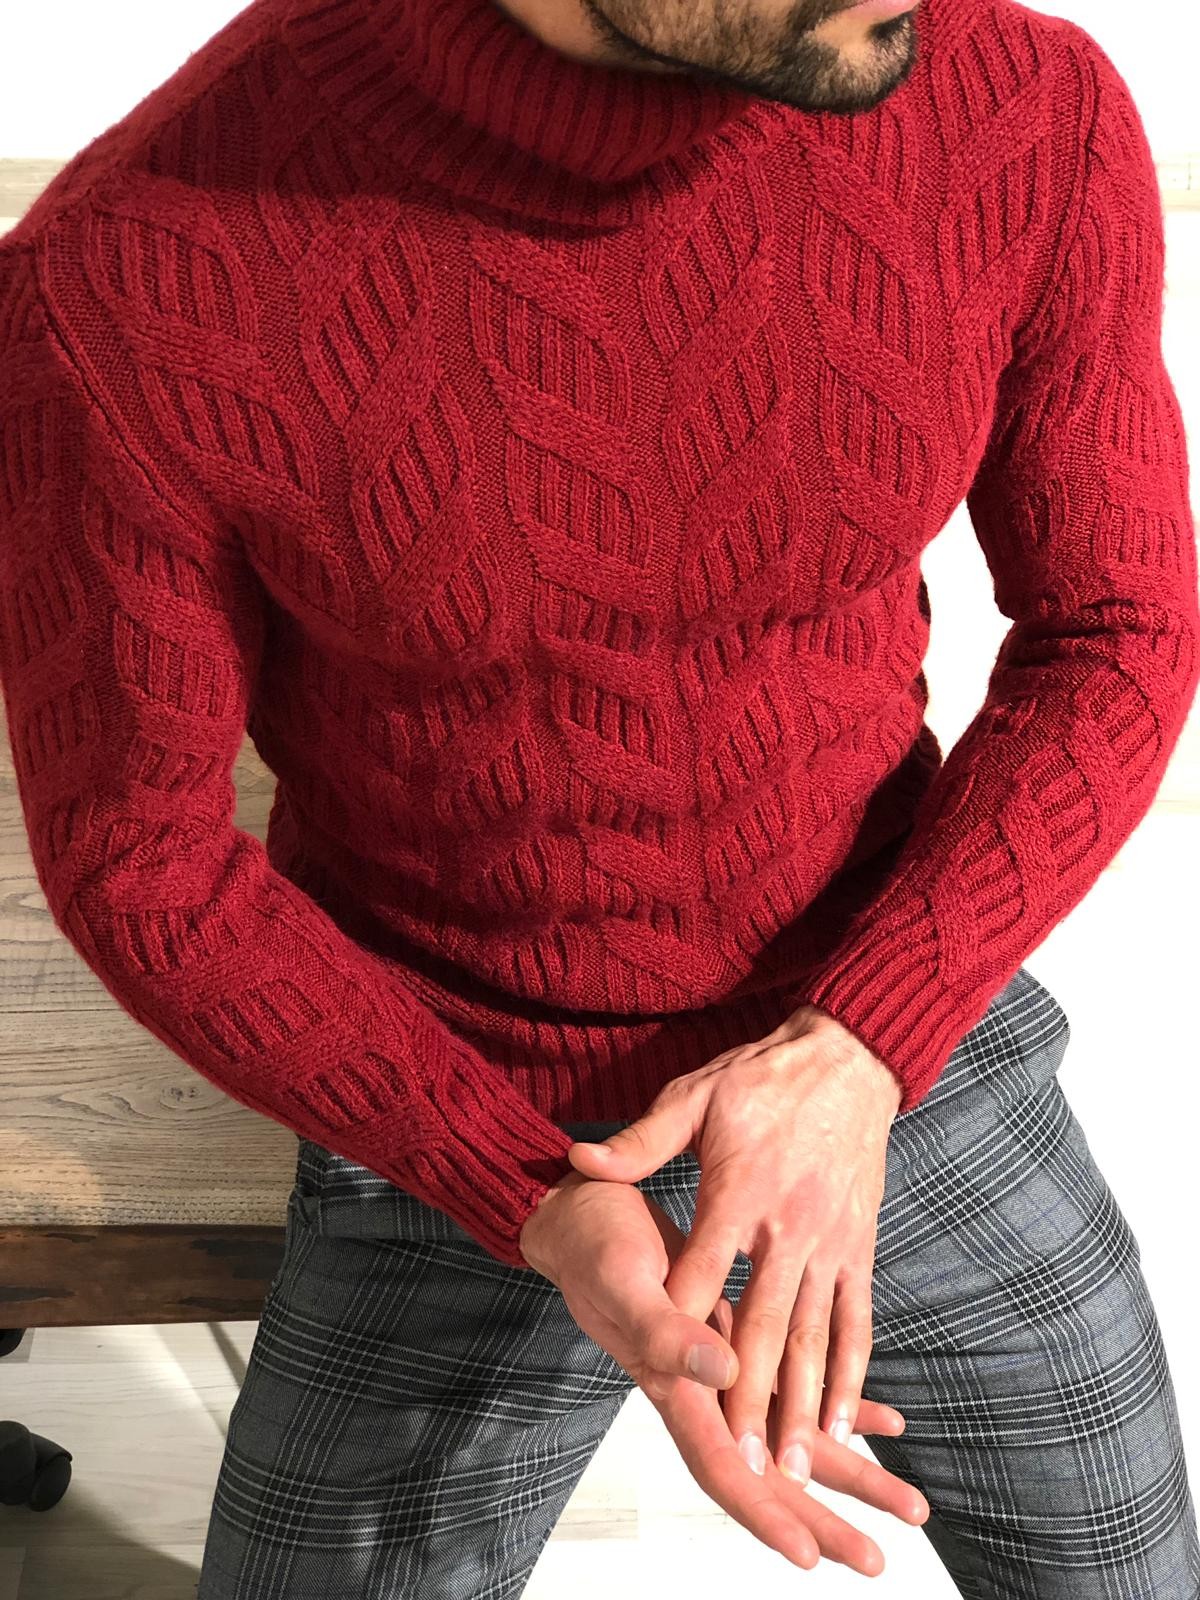 Buy Red Slim Fit Turtleneck Sweater by  with Free